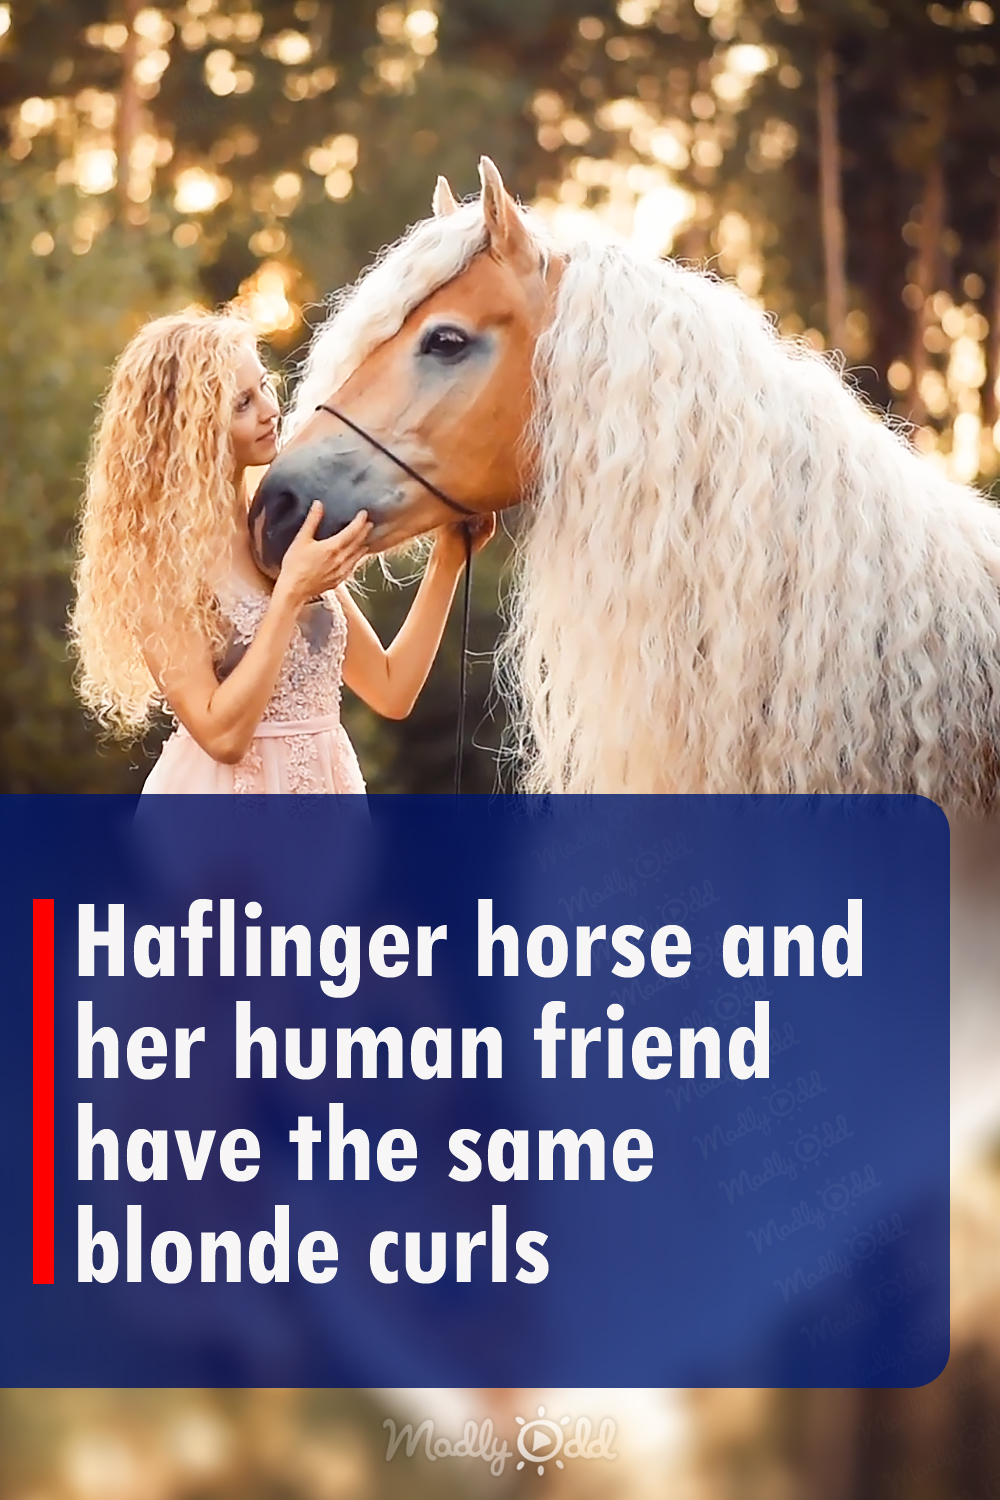 Haflinger horse and her human friend have the same blonde curls